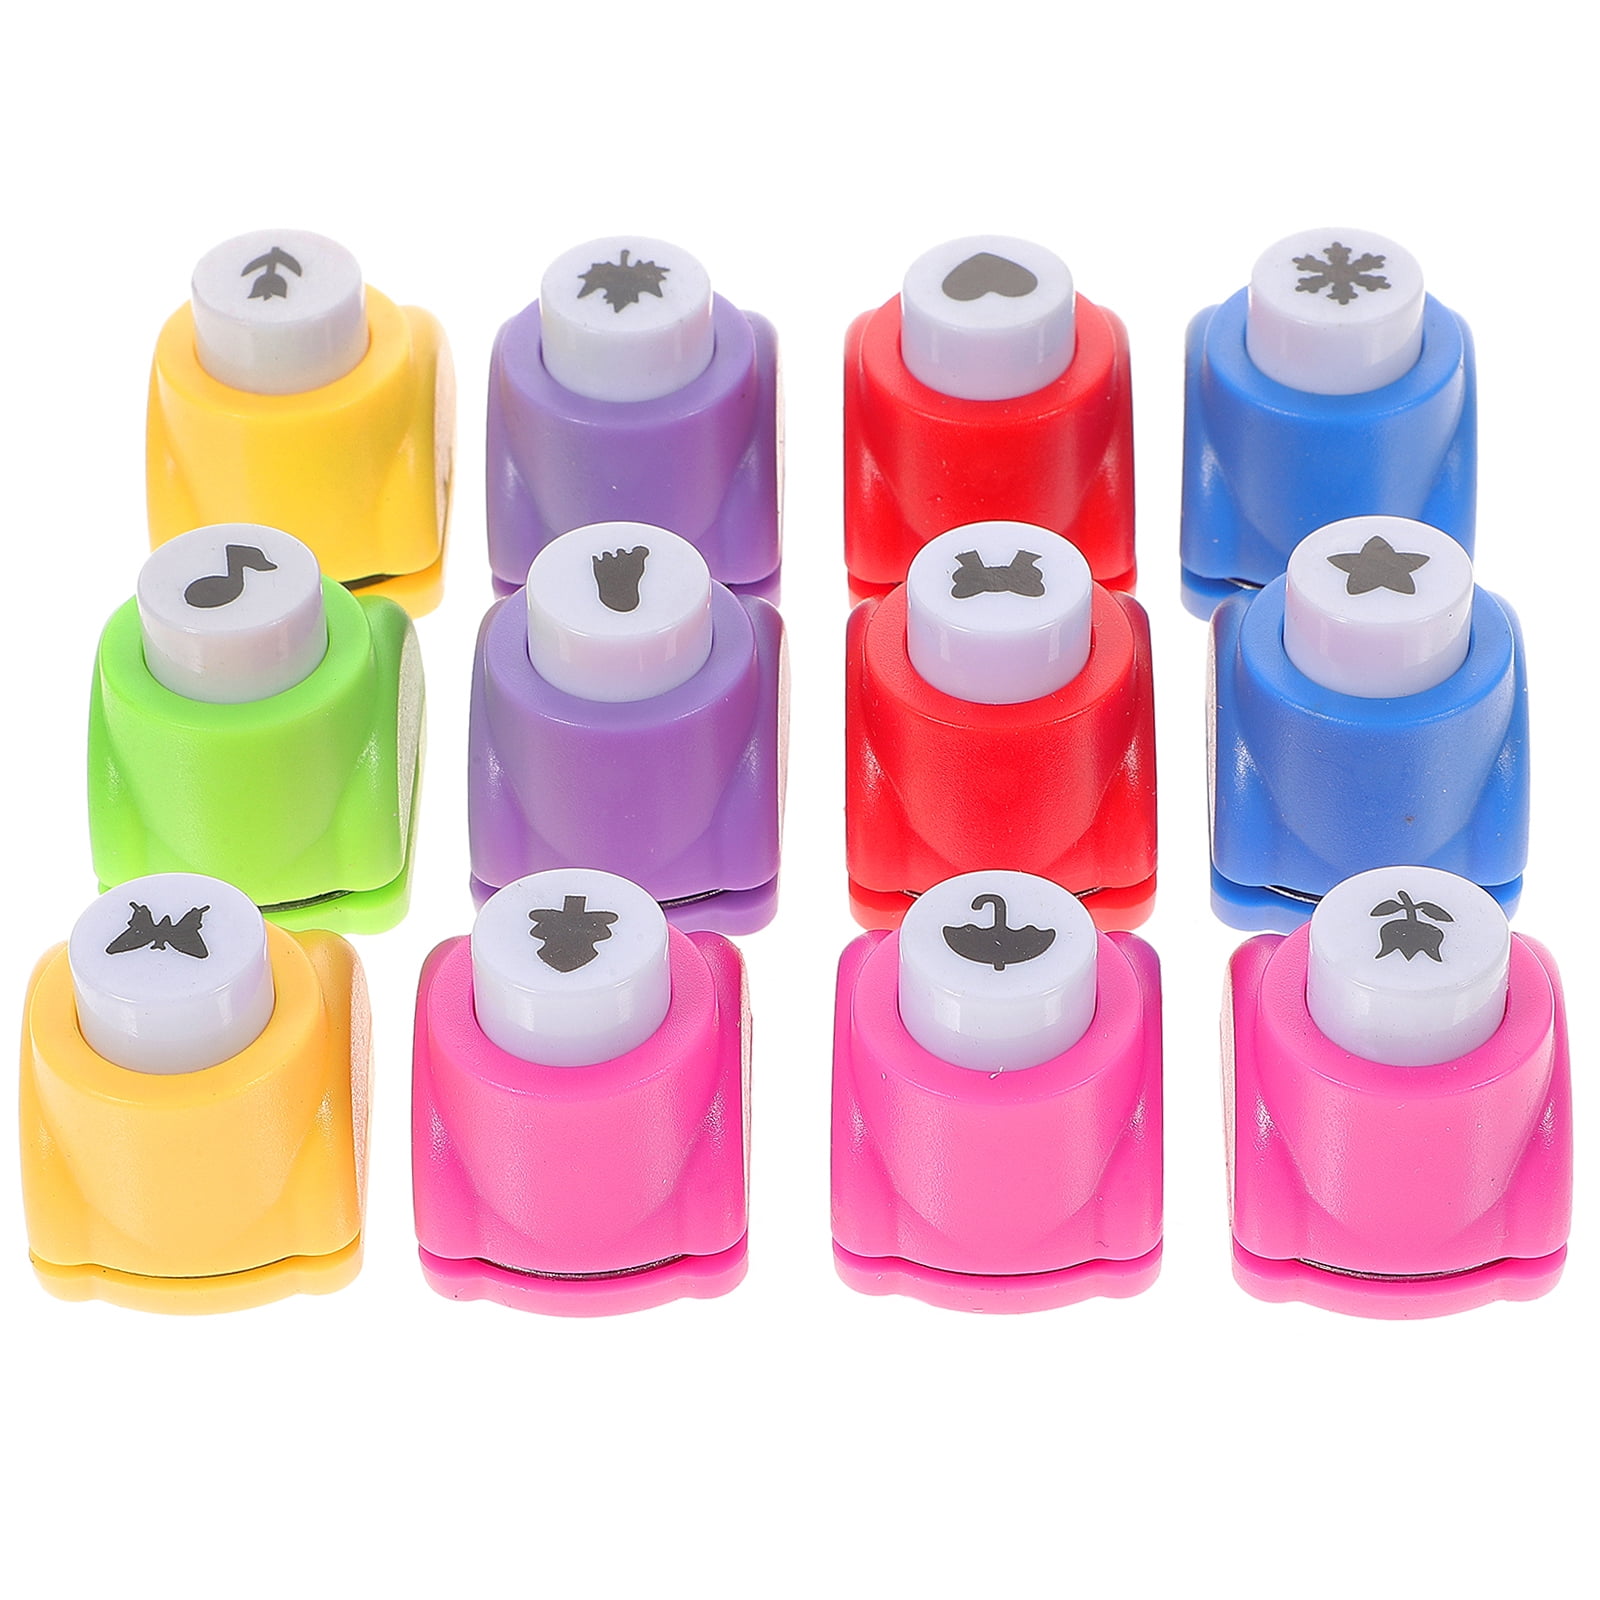 12pcs Paper Hole Punch for Crafts Scrapbooking Paper Puncher for Kids Crafting DIY Projects